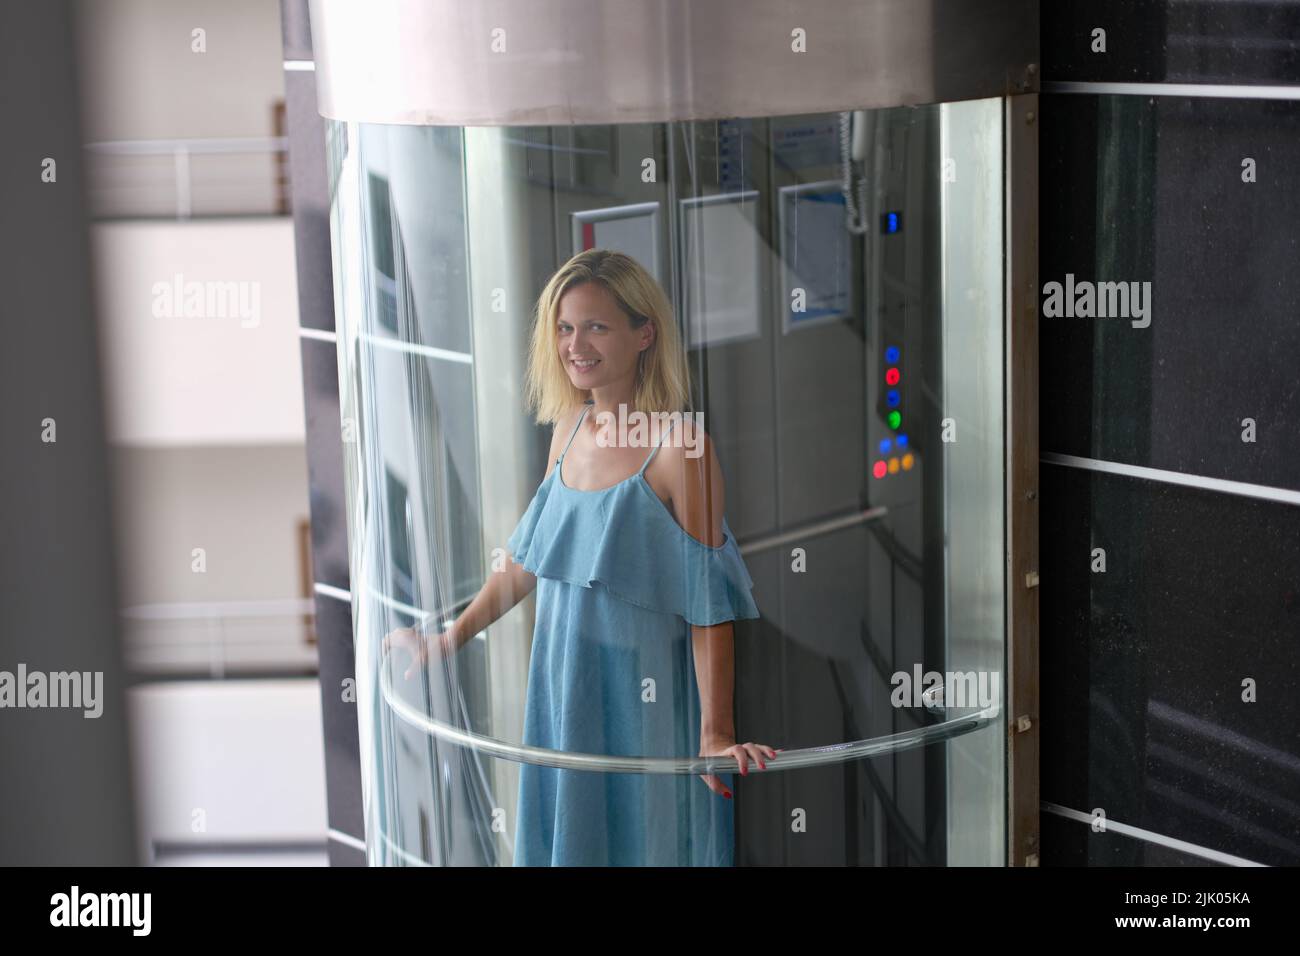 Beautiful smiling woman in transparent glass elevator Stock Photo